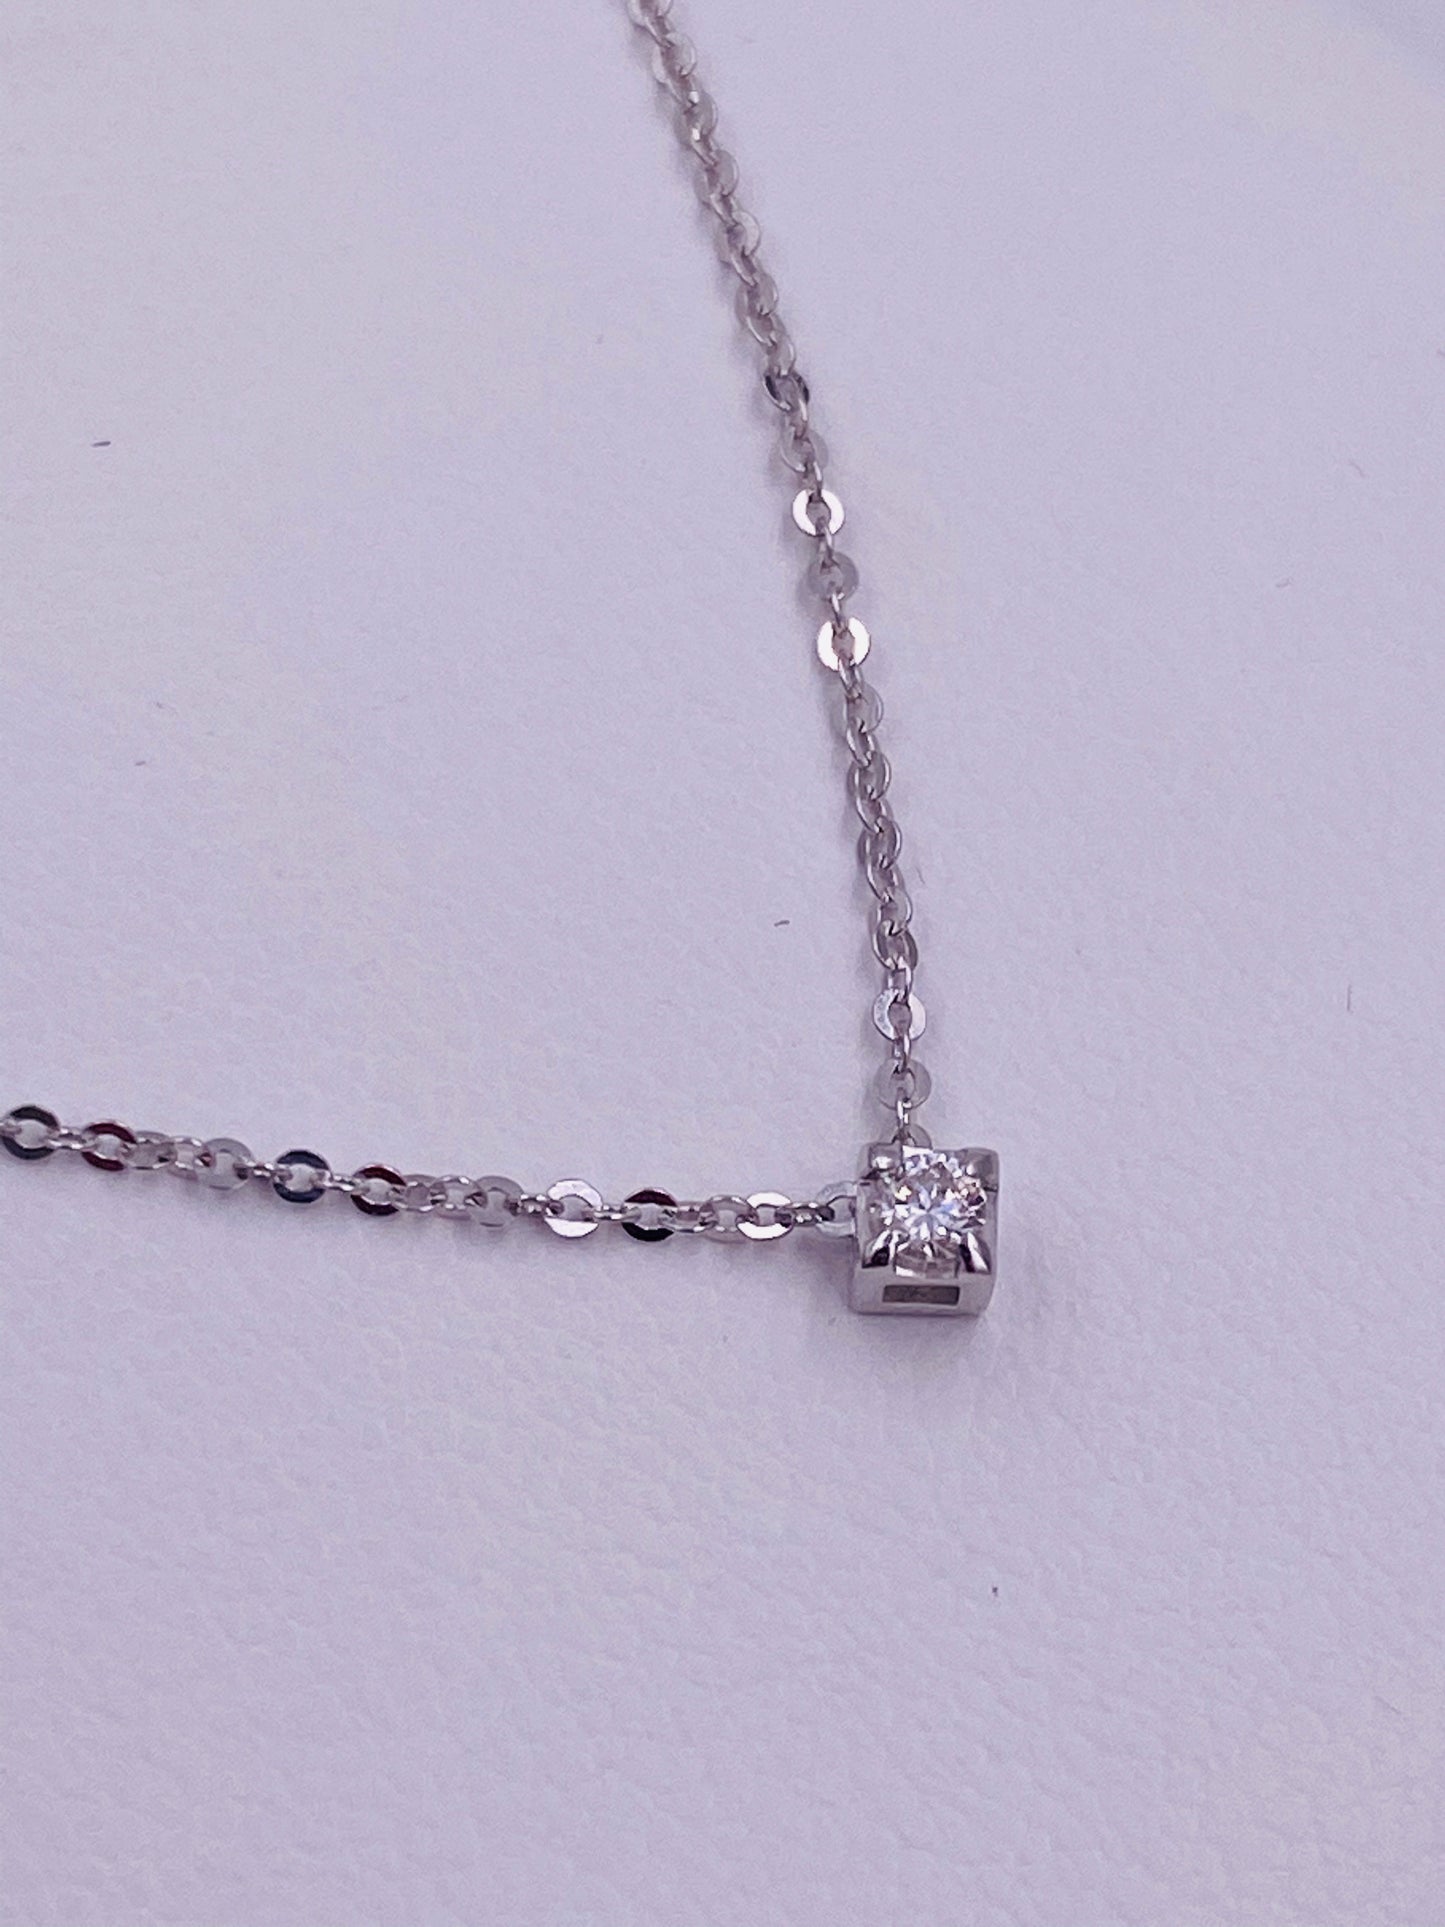 Crieri Punto Luce necklace in white gold and diamonds